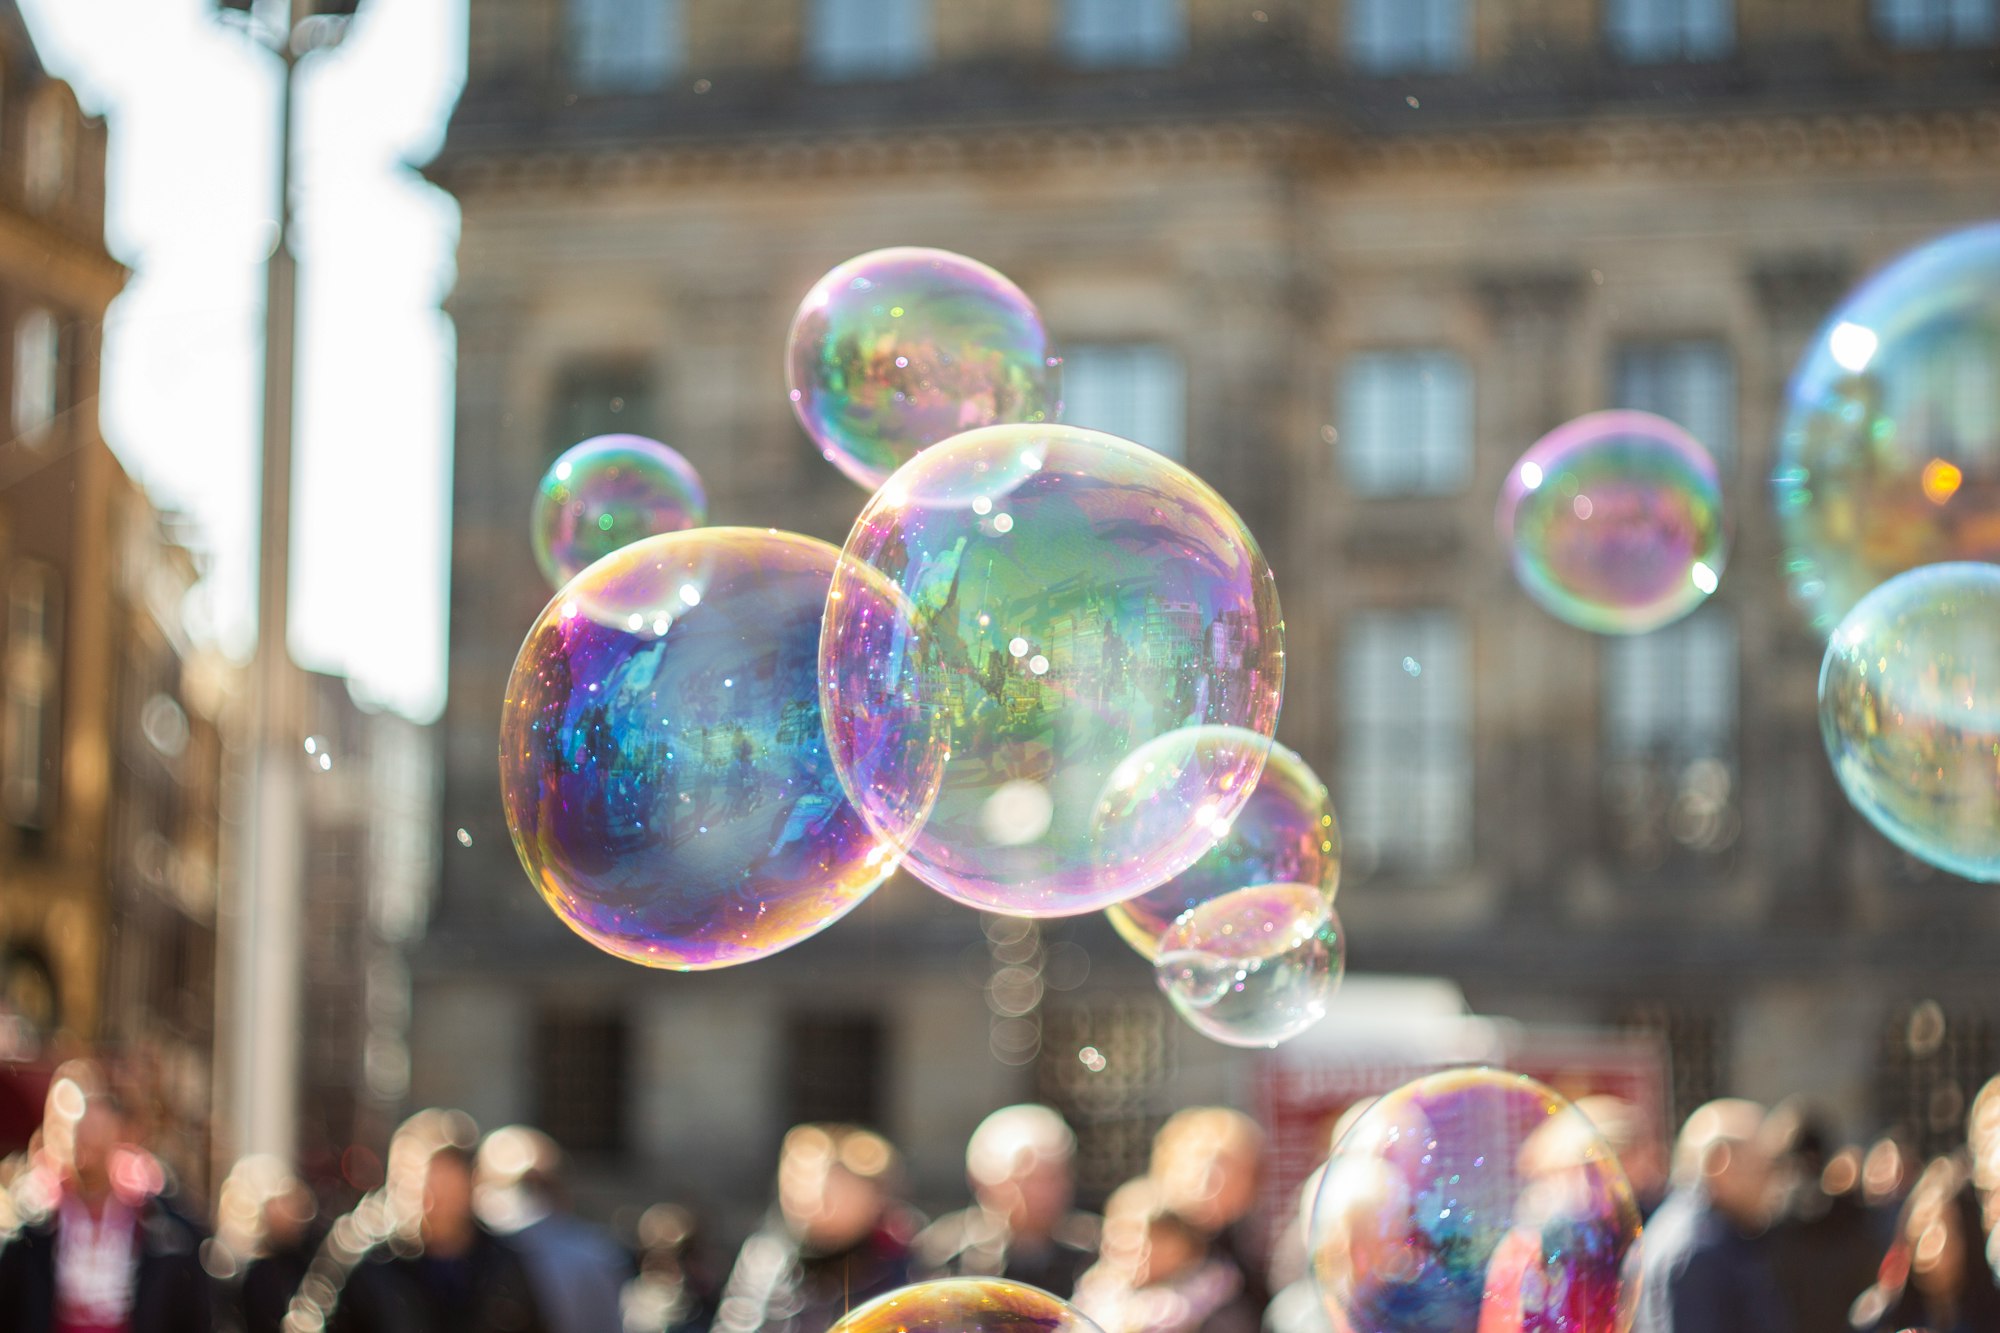 several iridescent soap bubbles with a blurry crowd in the distance